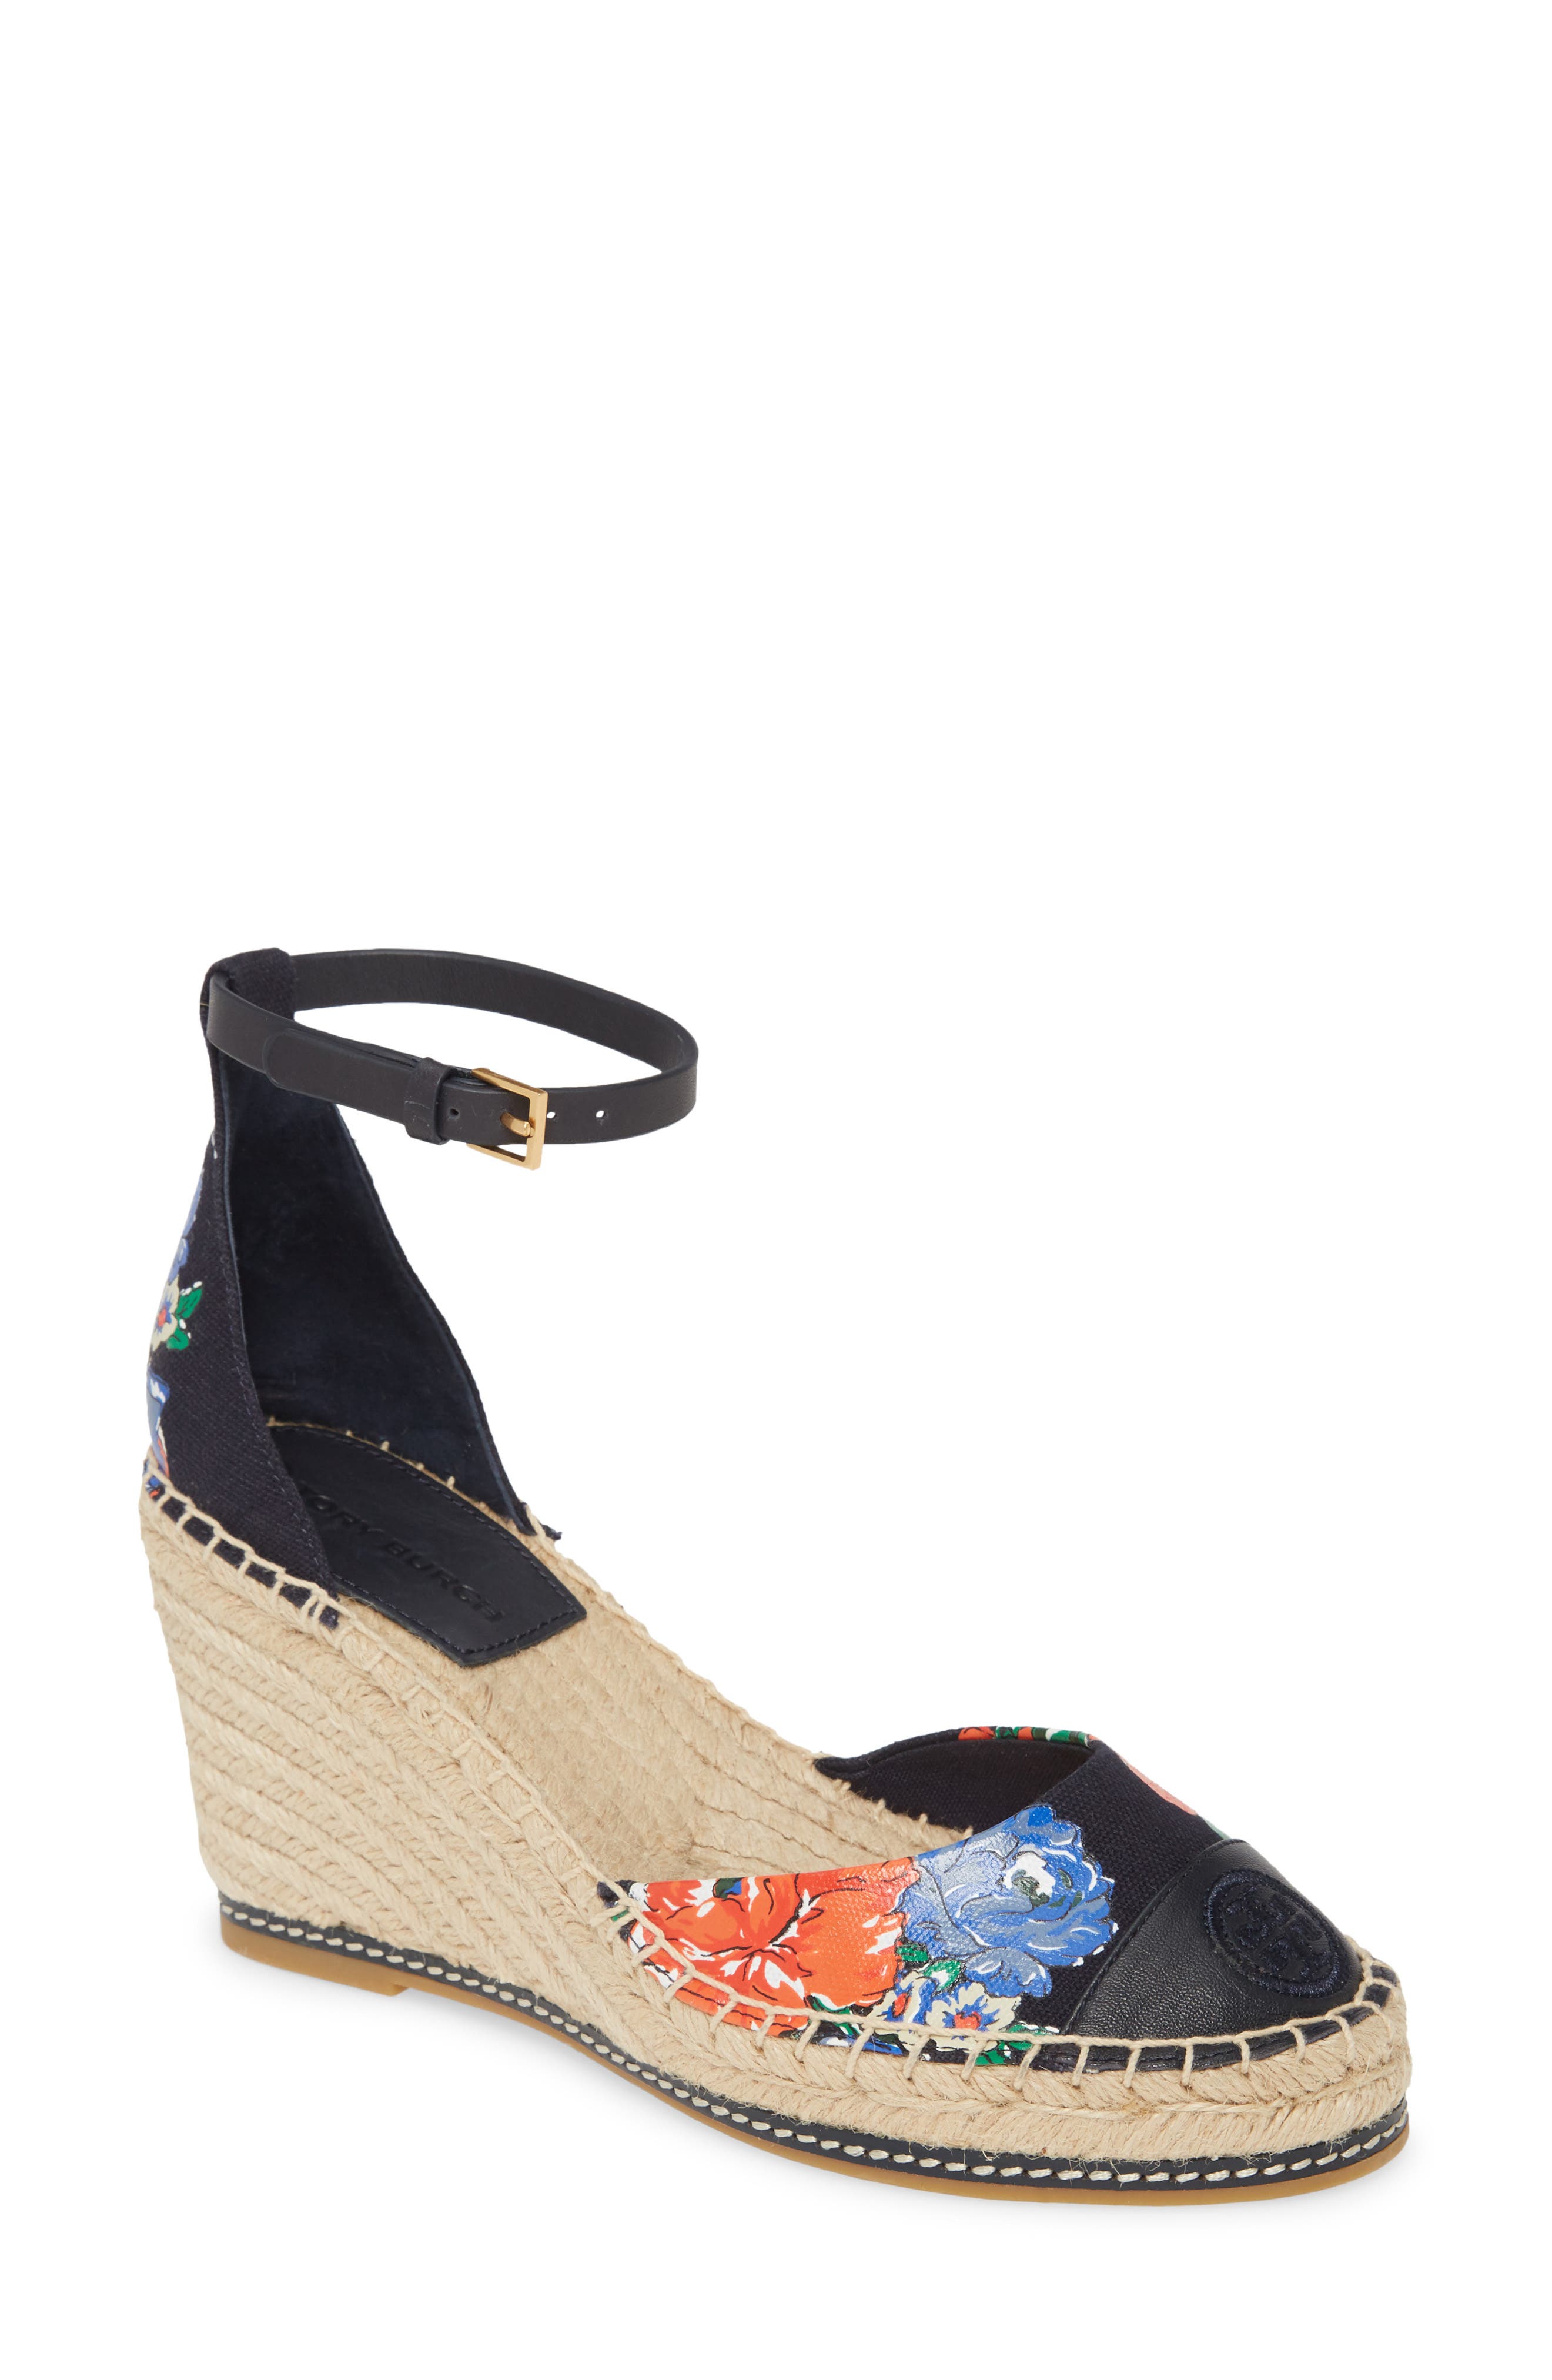 tory burch navy wedge sandals